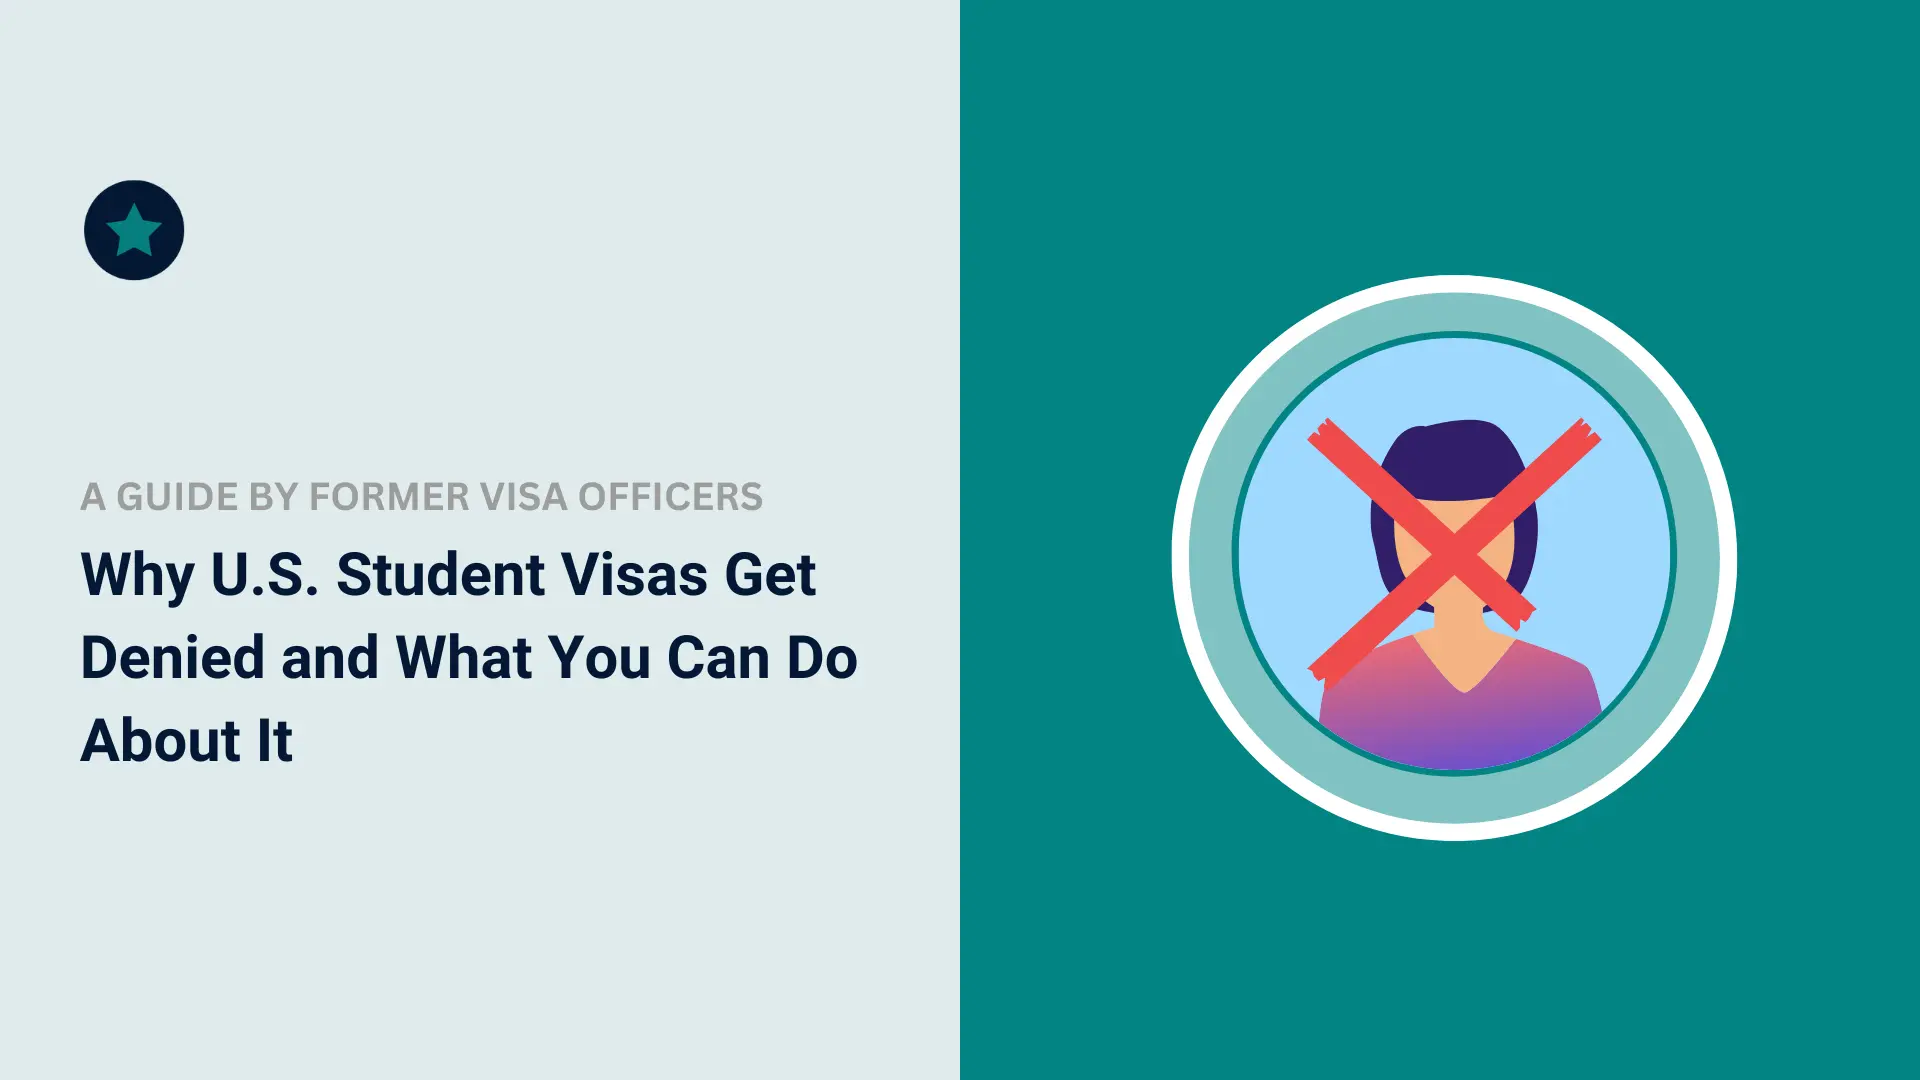 Why U.S. Student Visas Get Denied and What You Can Do About It